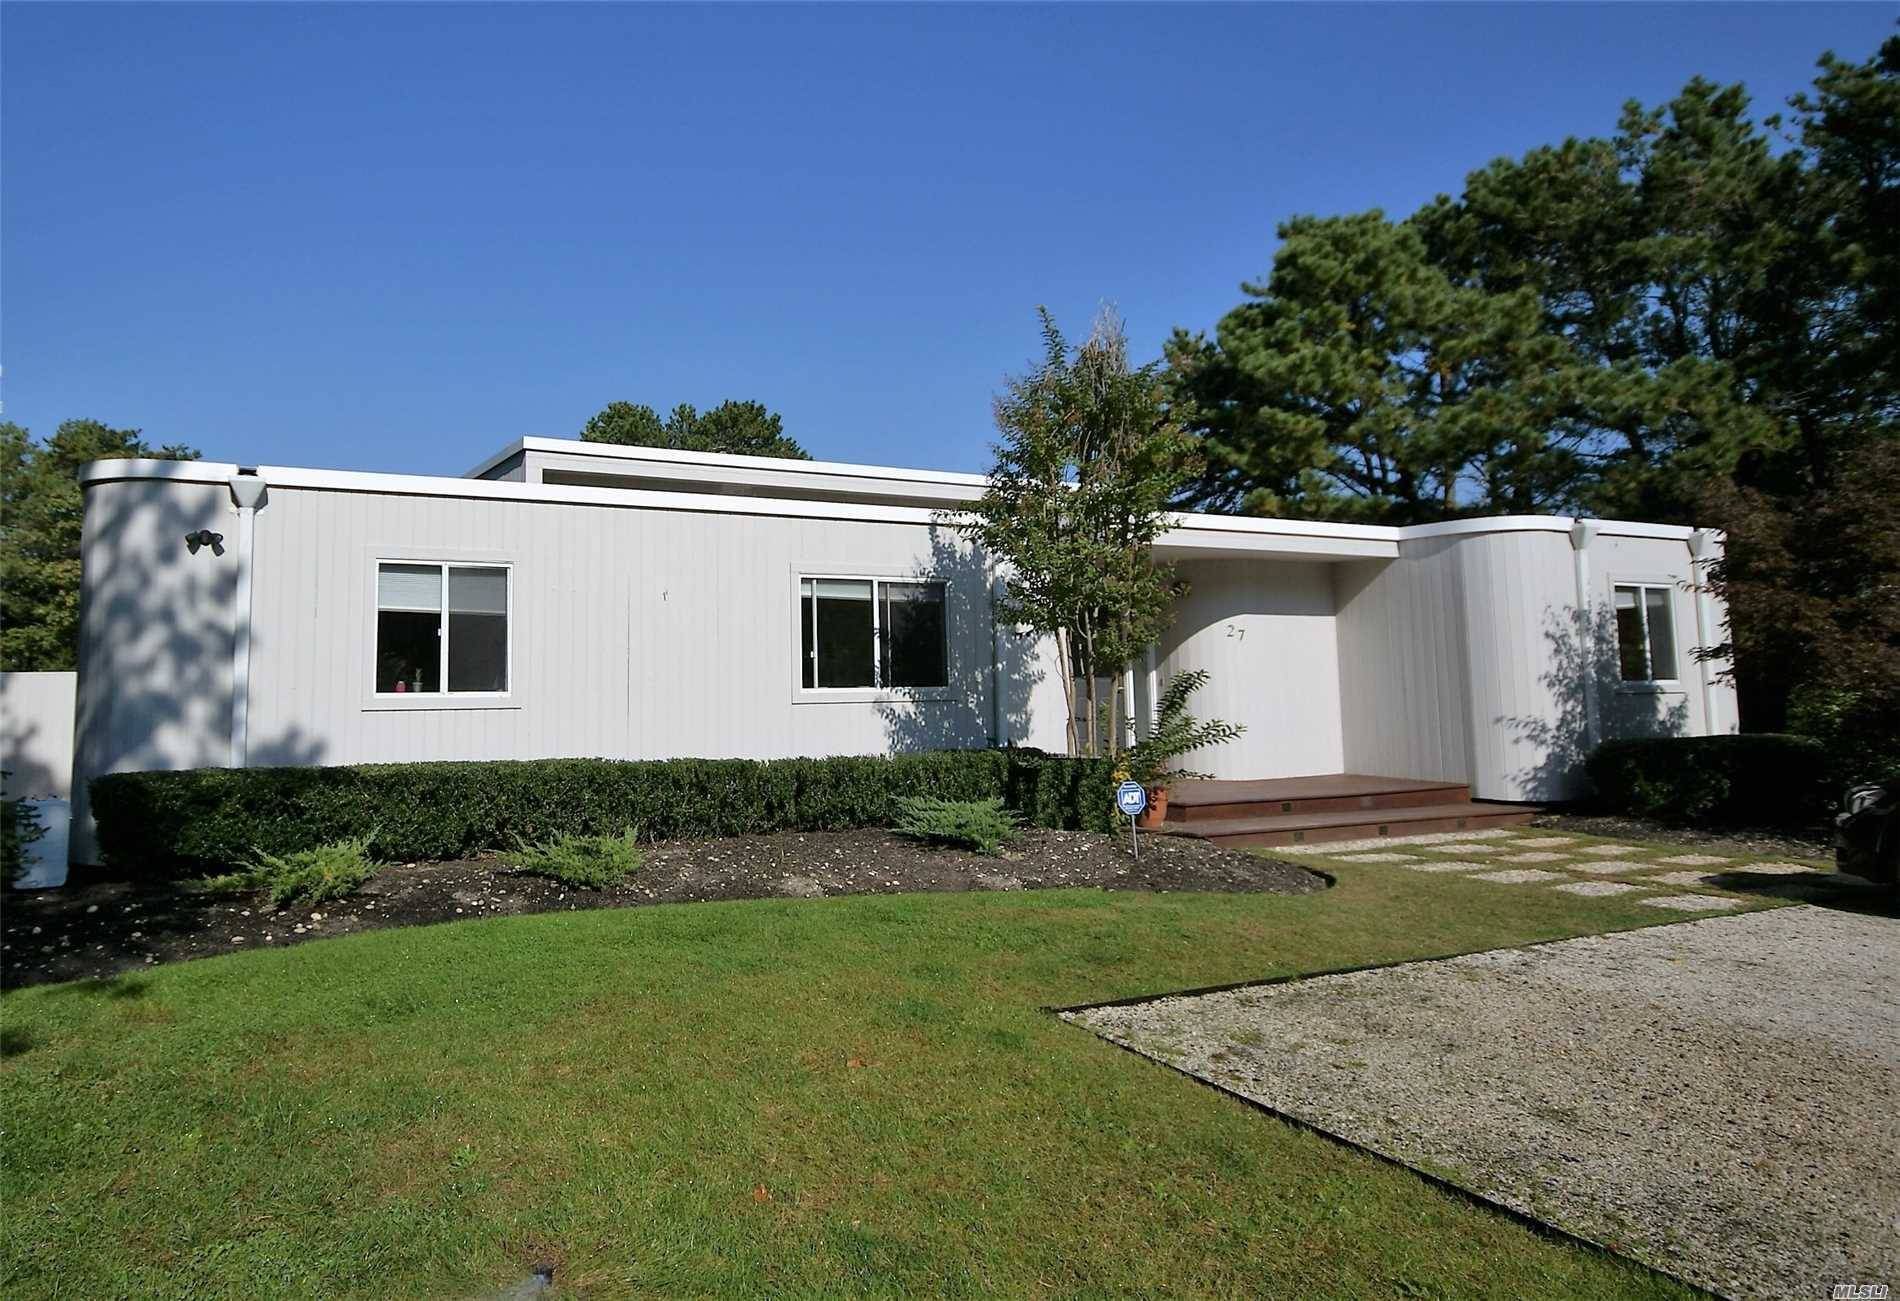 Updated 4 Bedroom, 3 Bath Contemporary Set On 1 Beautiful Acre Of Property In The Village Of Quogue.